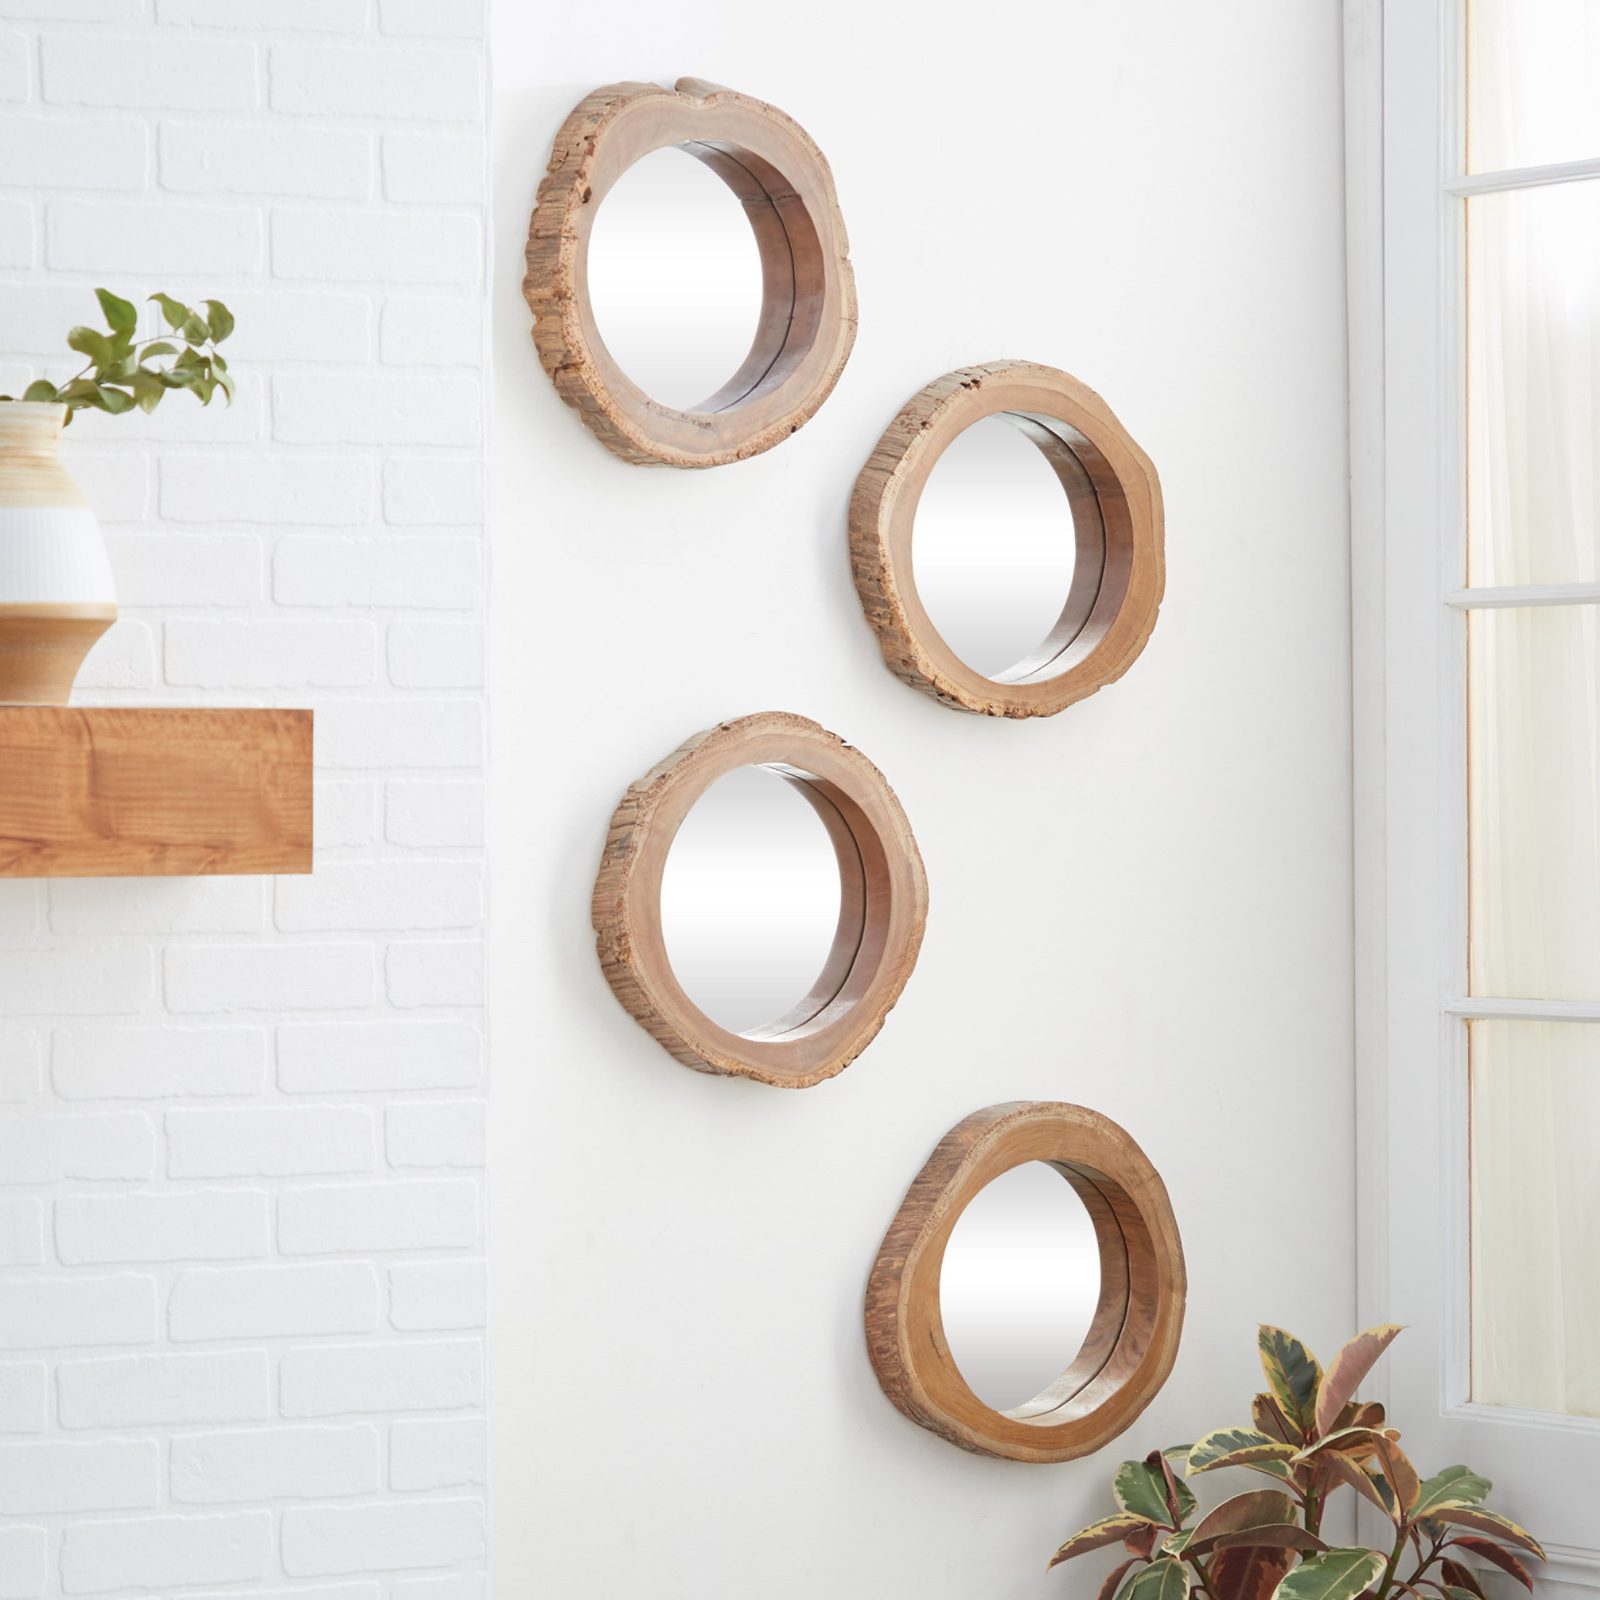 Display a Set of Rustic Mirrors